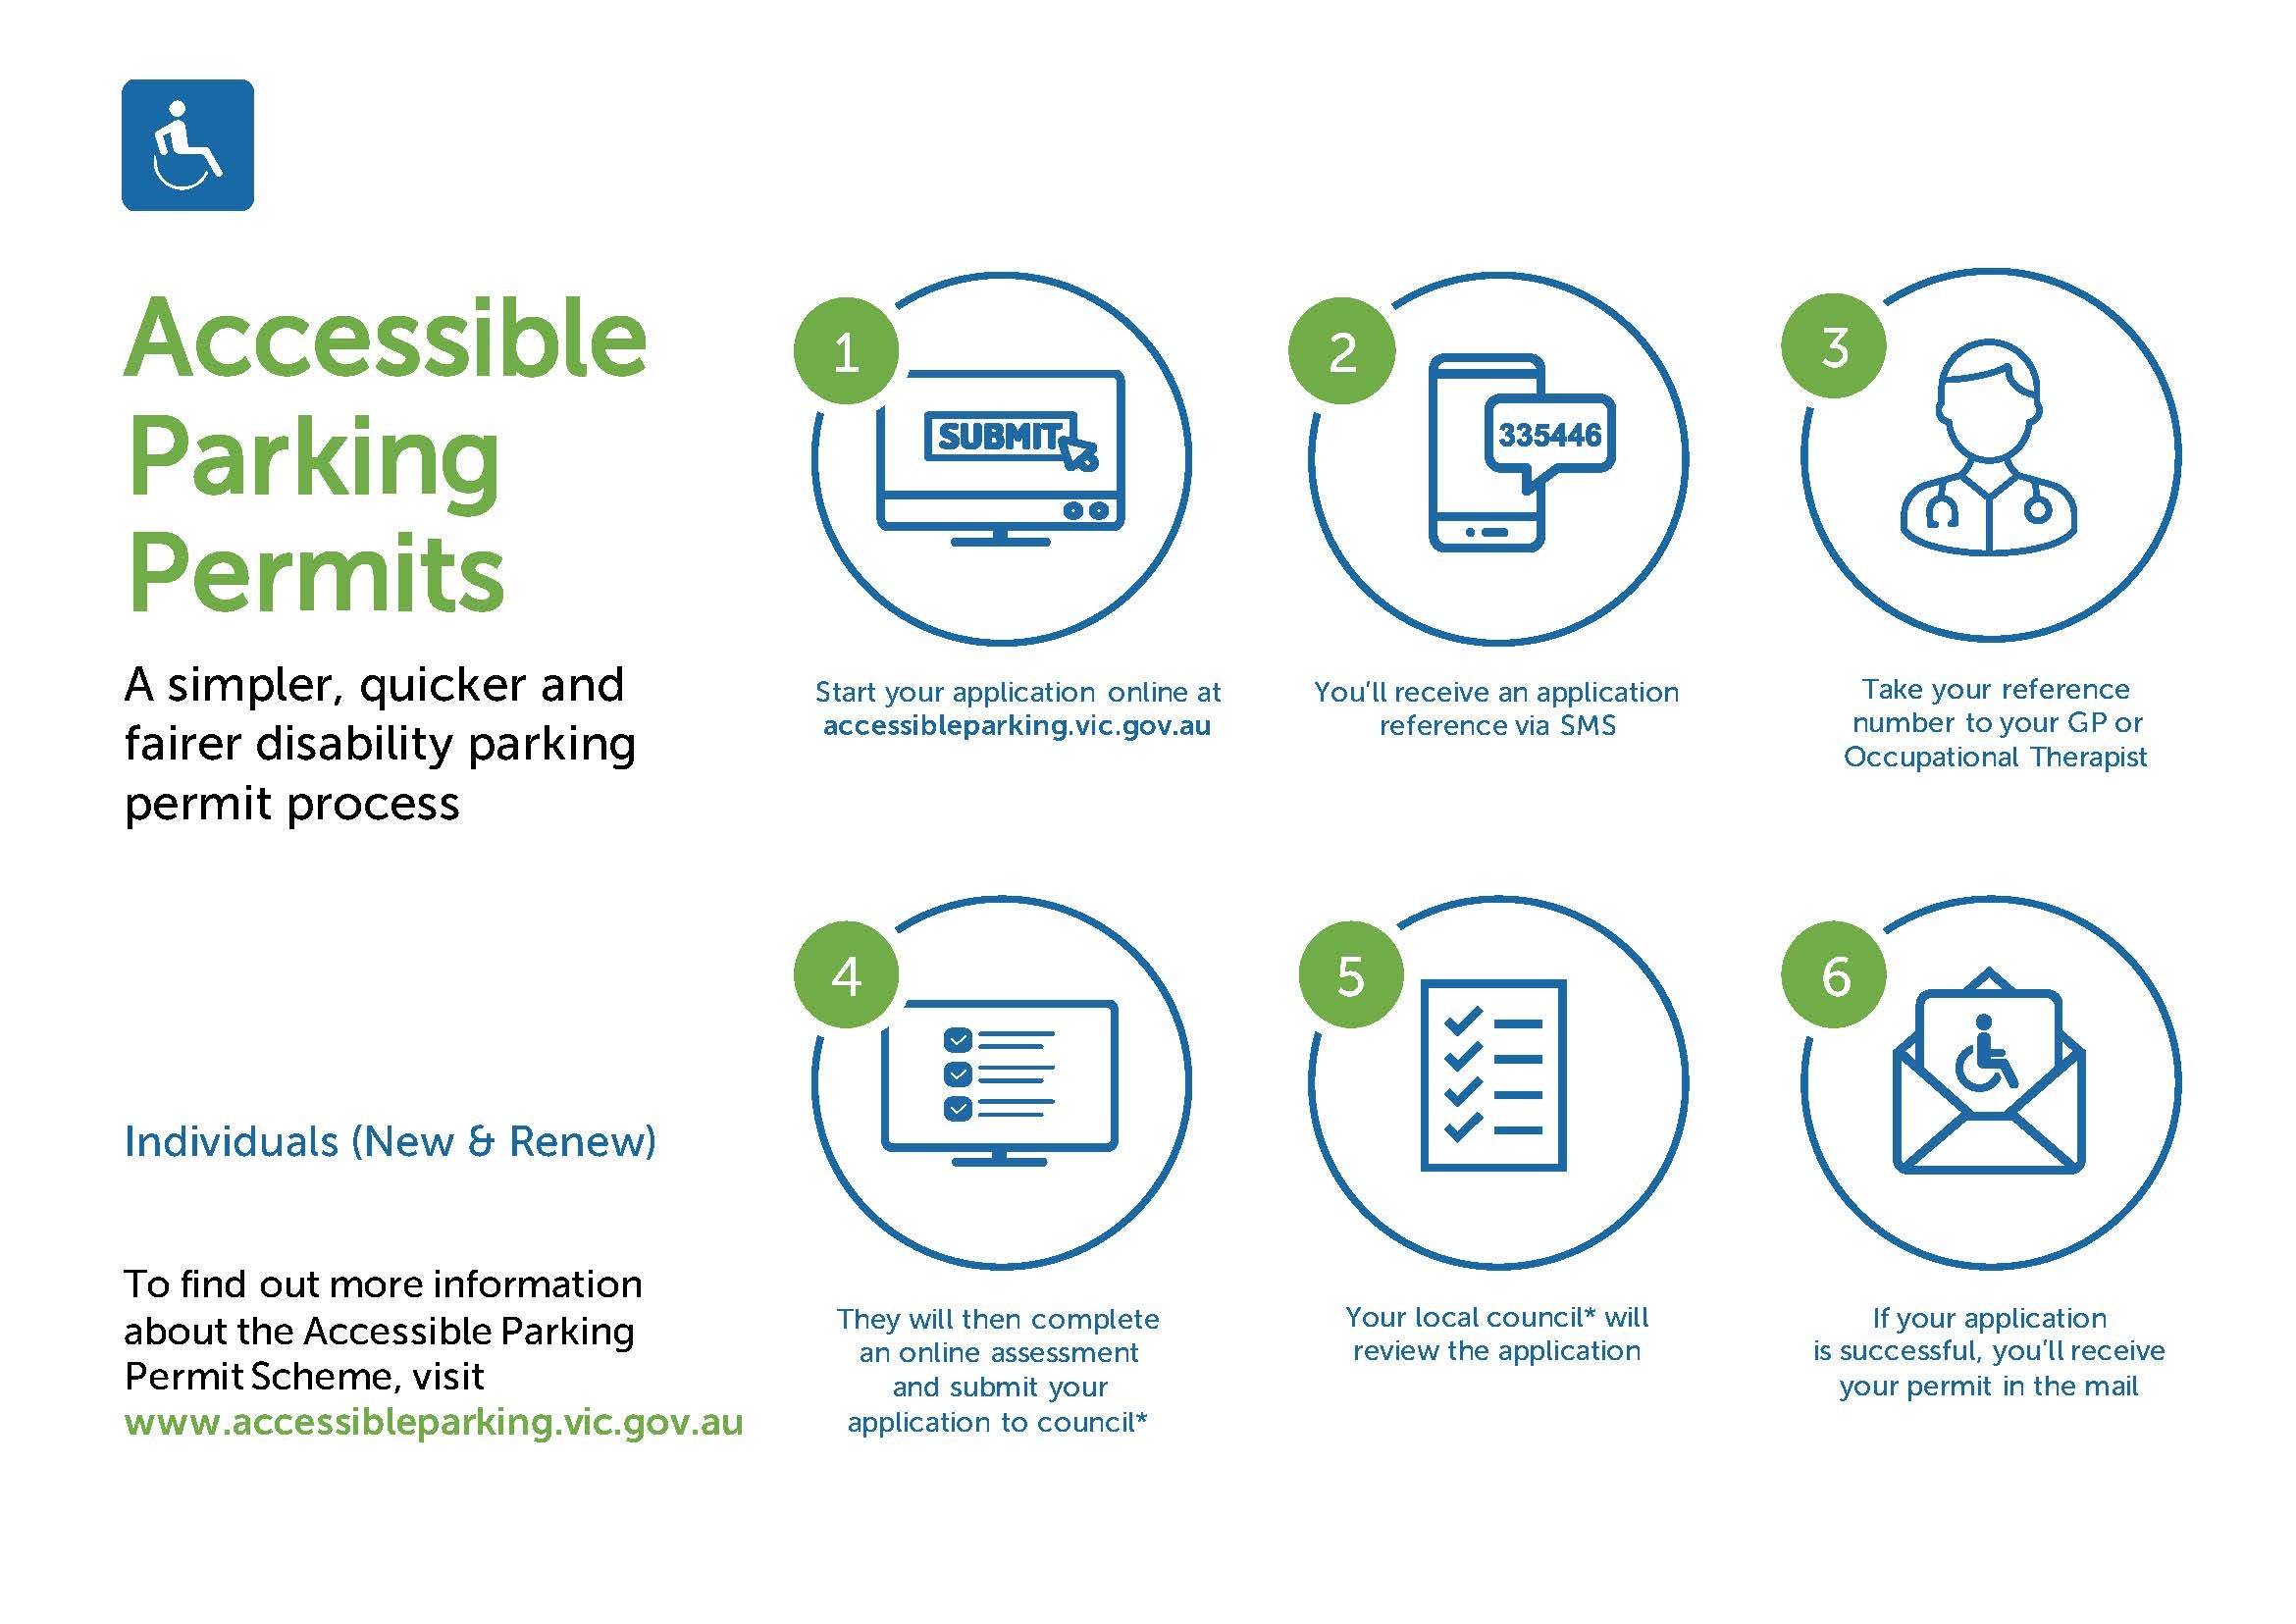 MED-VicRoads-Accessible-parking-process-20210409.jpg